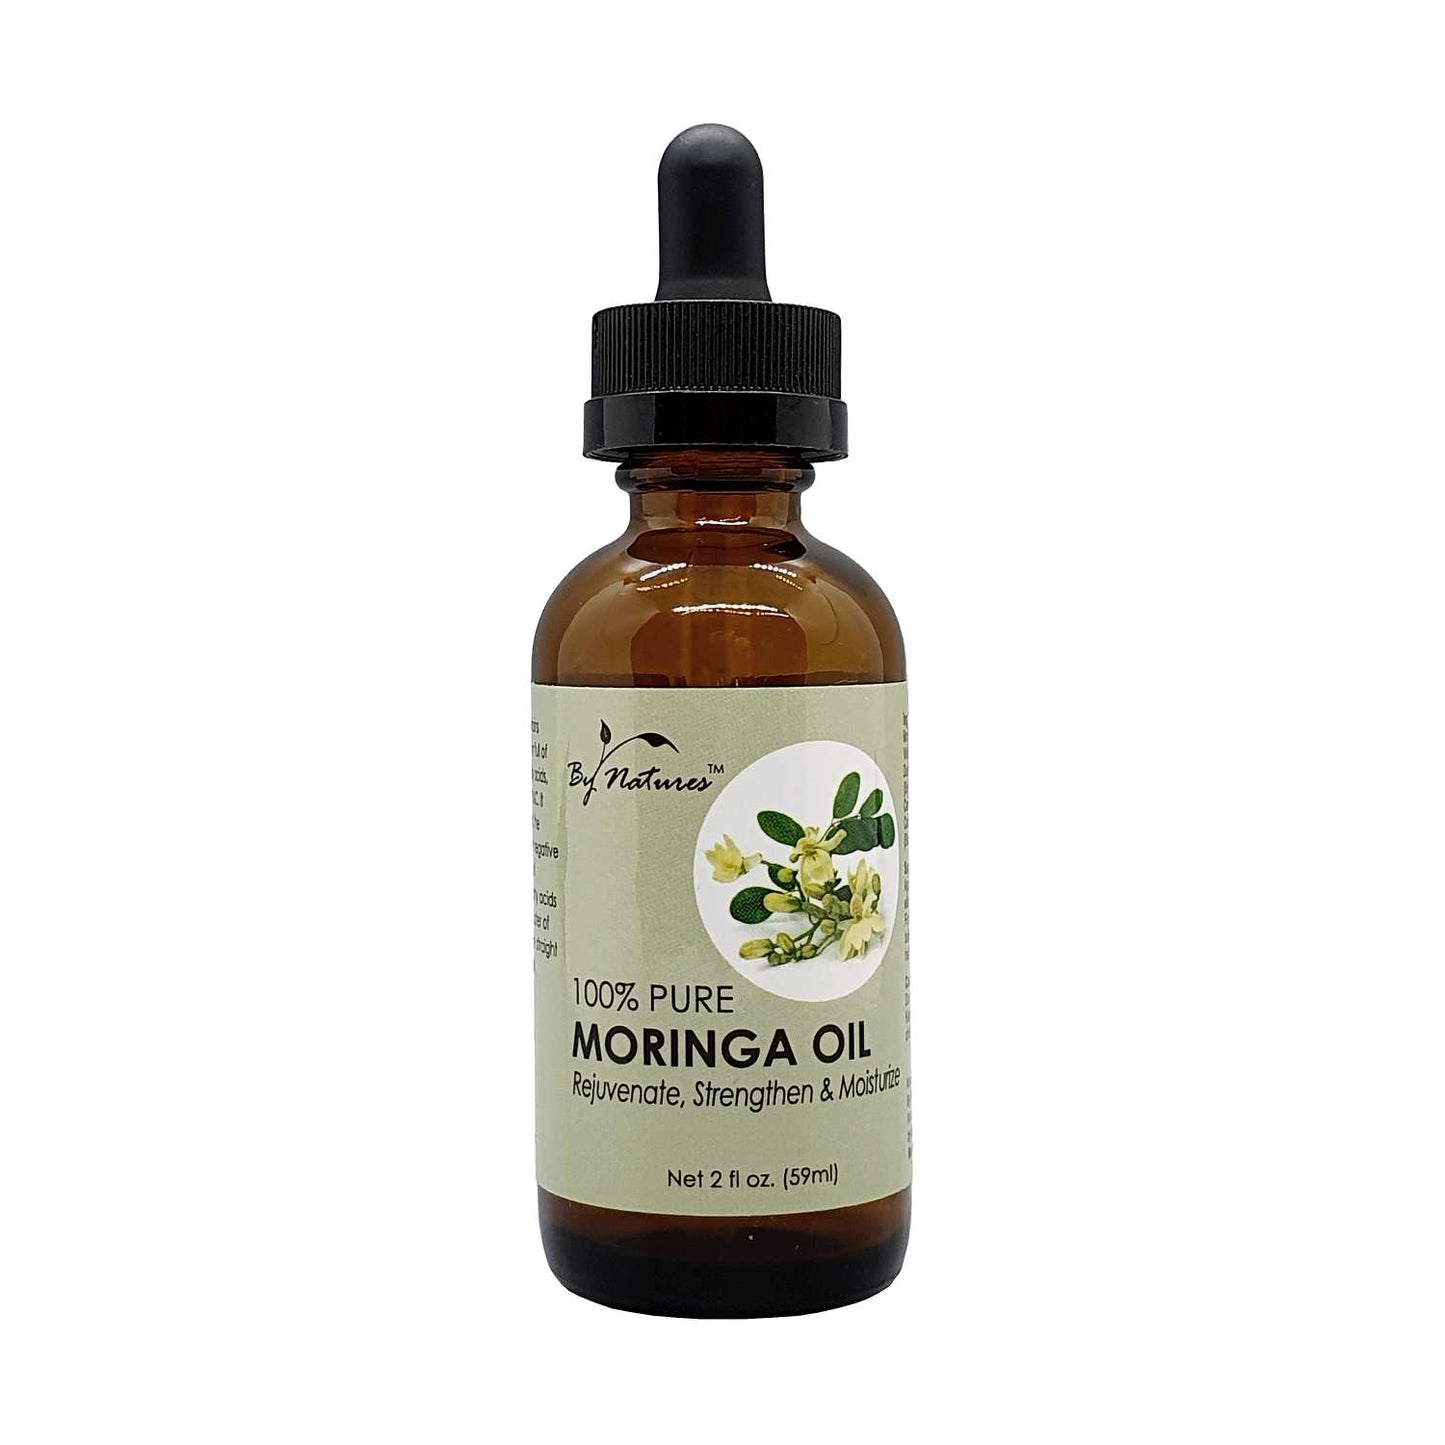 By Natures Moringa Oil